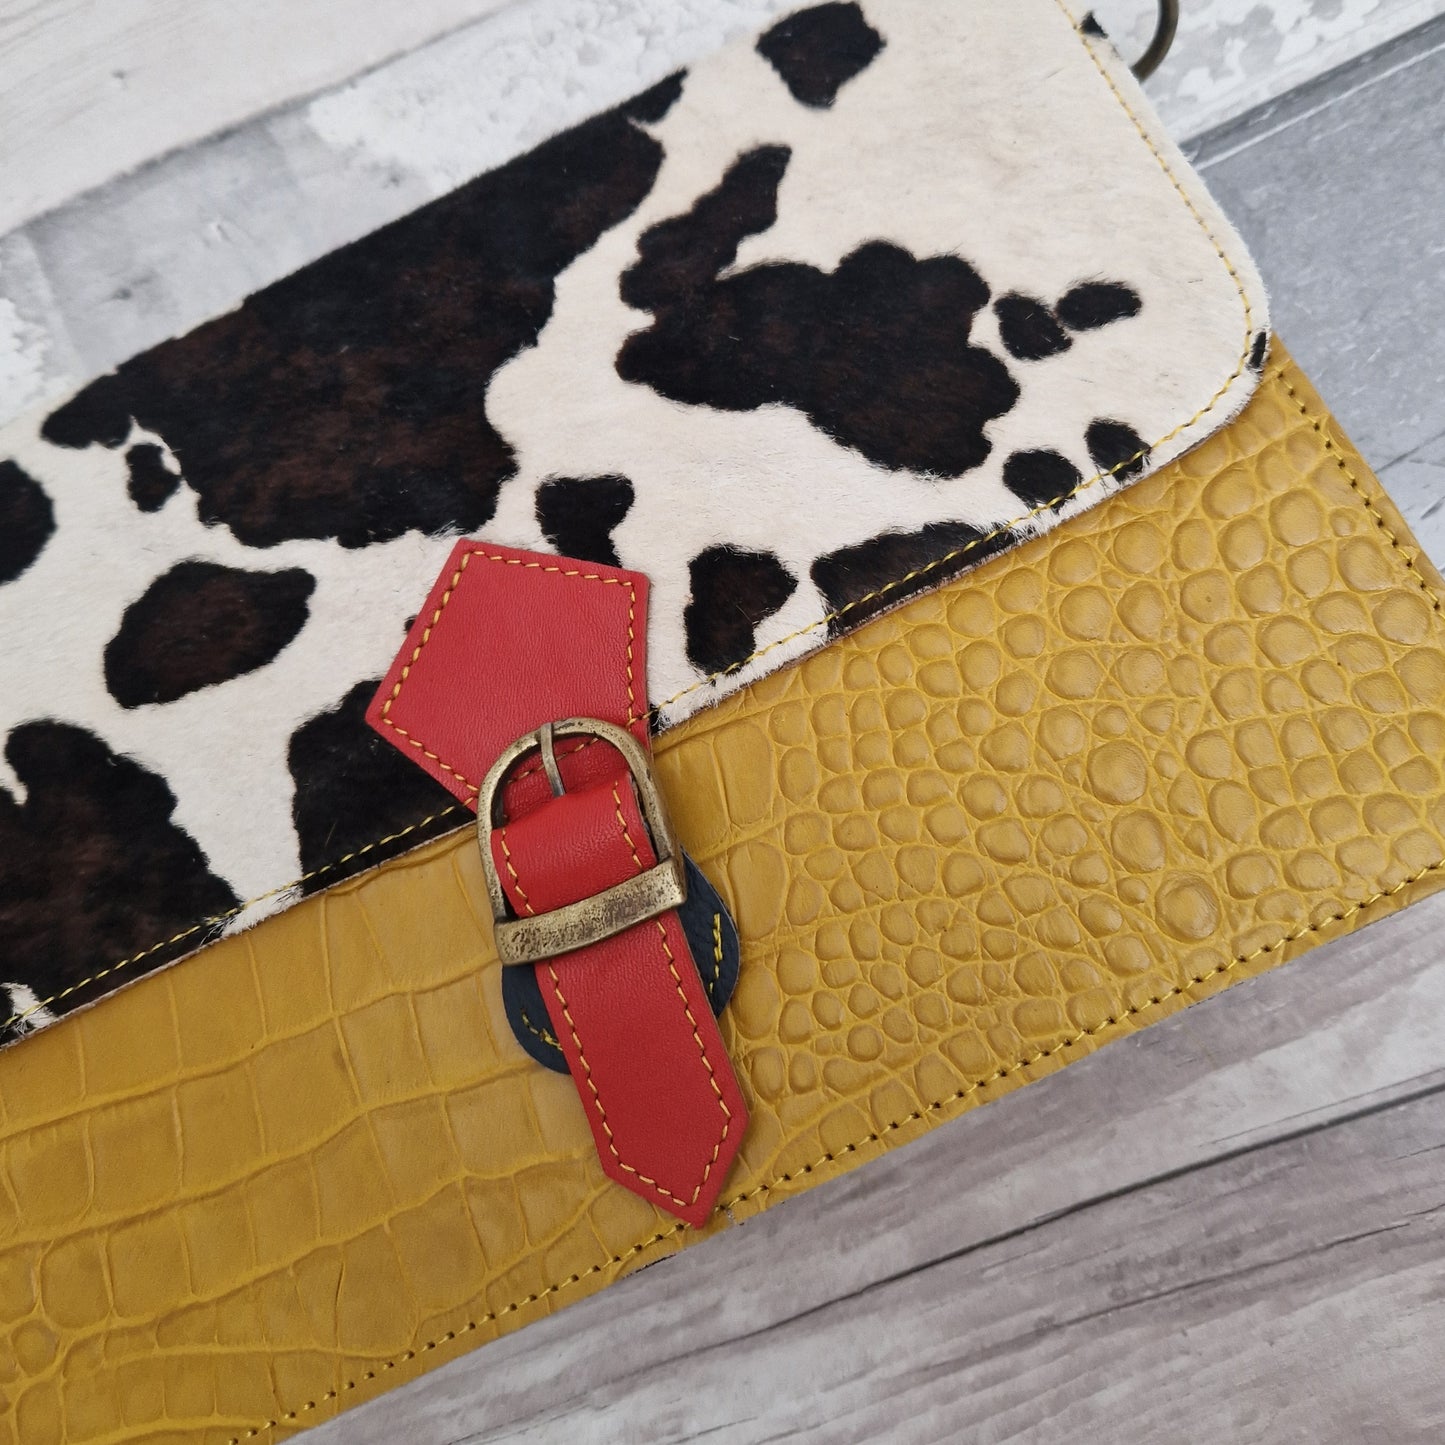 Mustard coloured leather bag with a textured panel of cow hide.